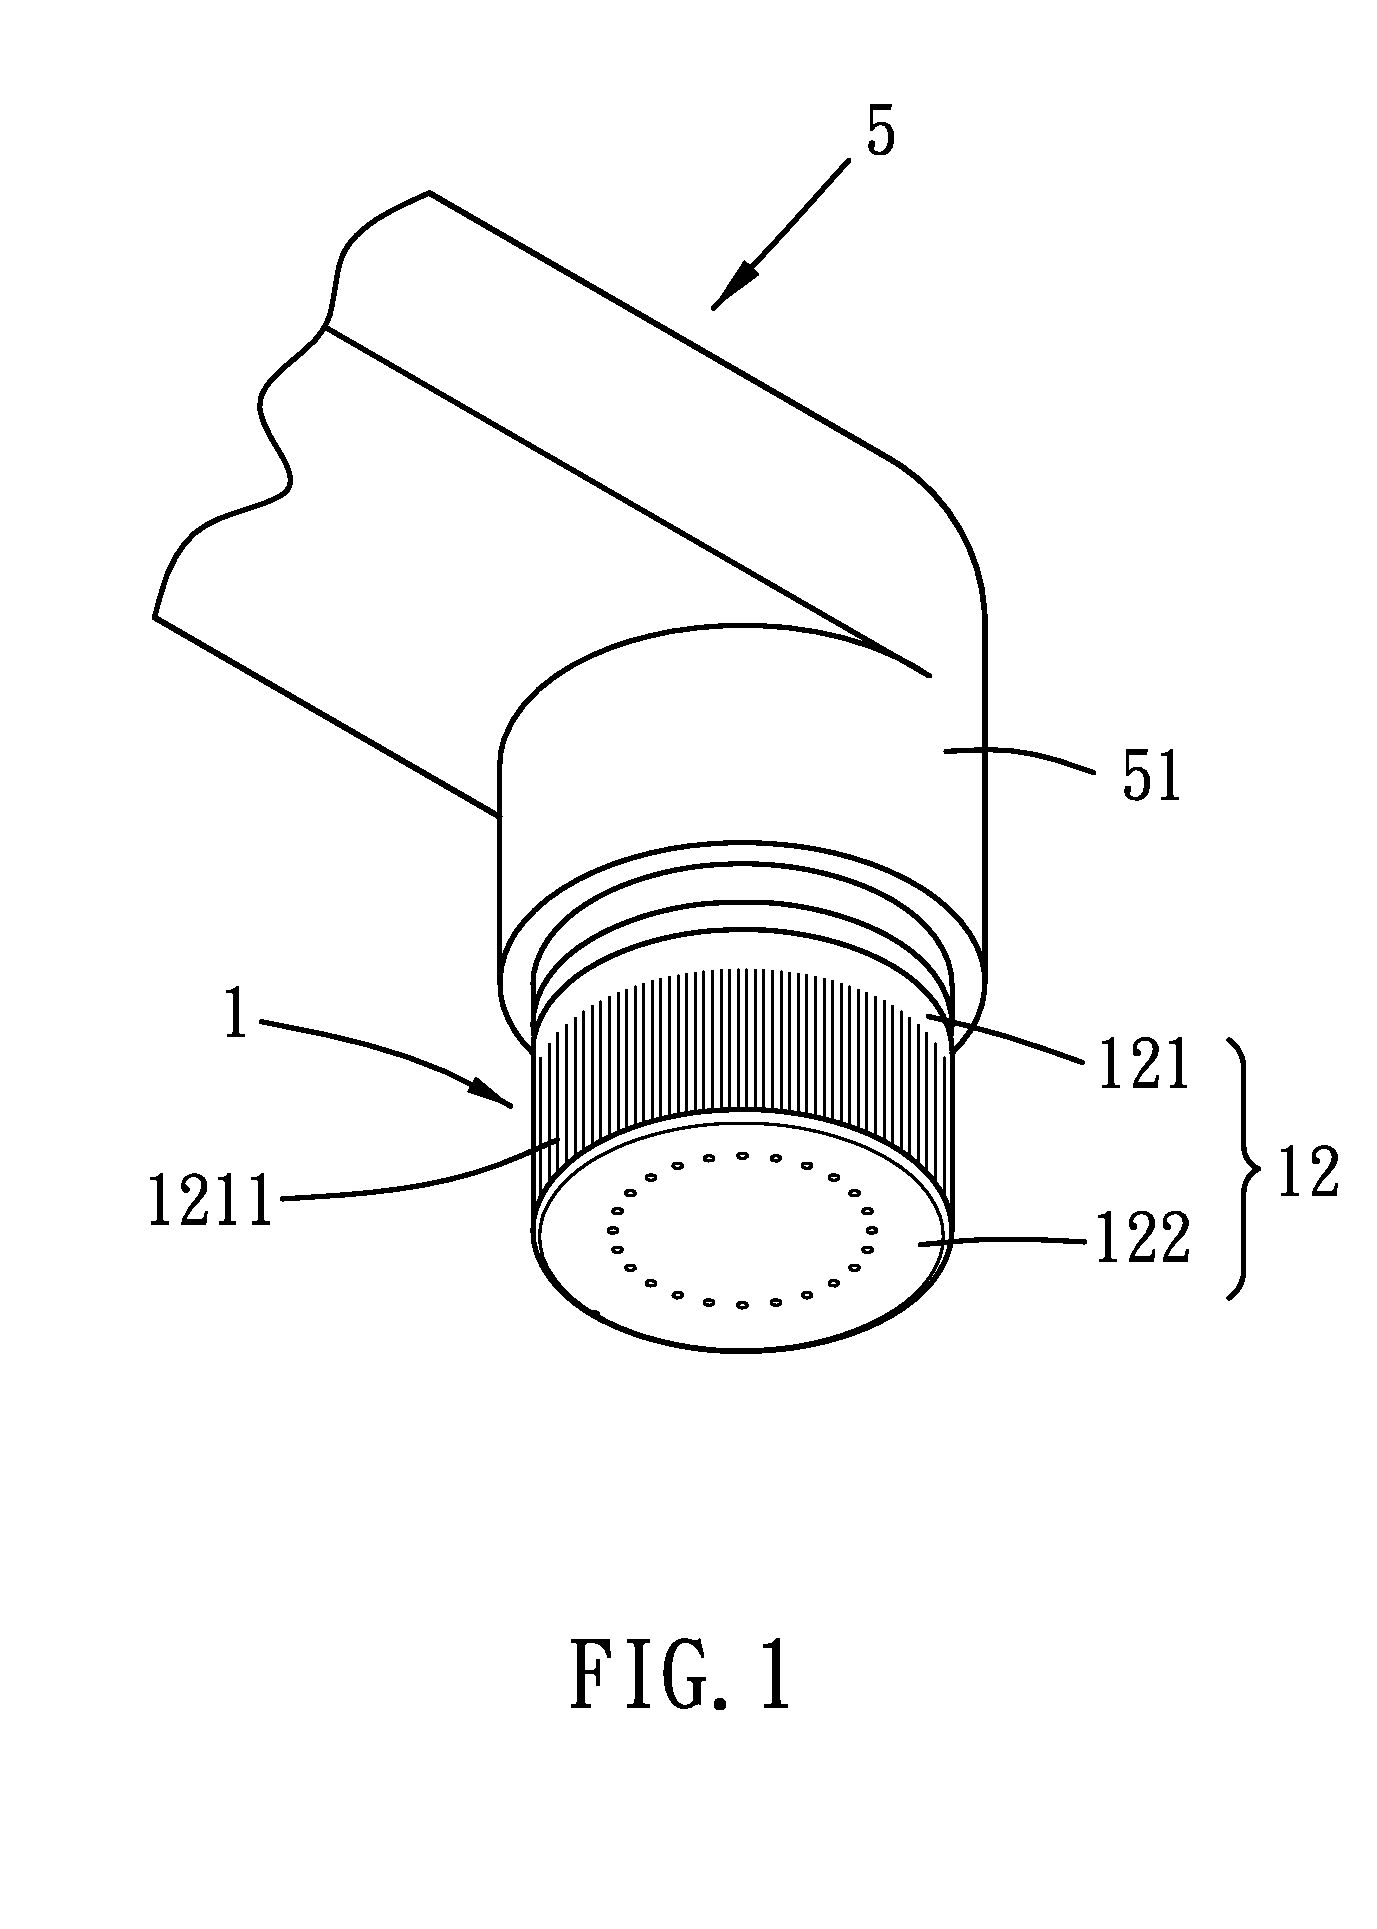 Control valve for a water tap